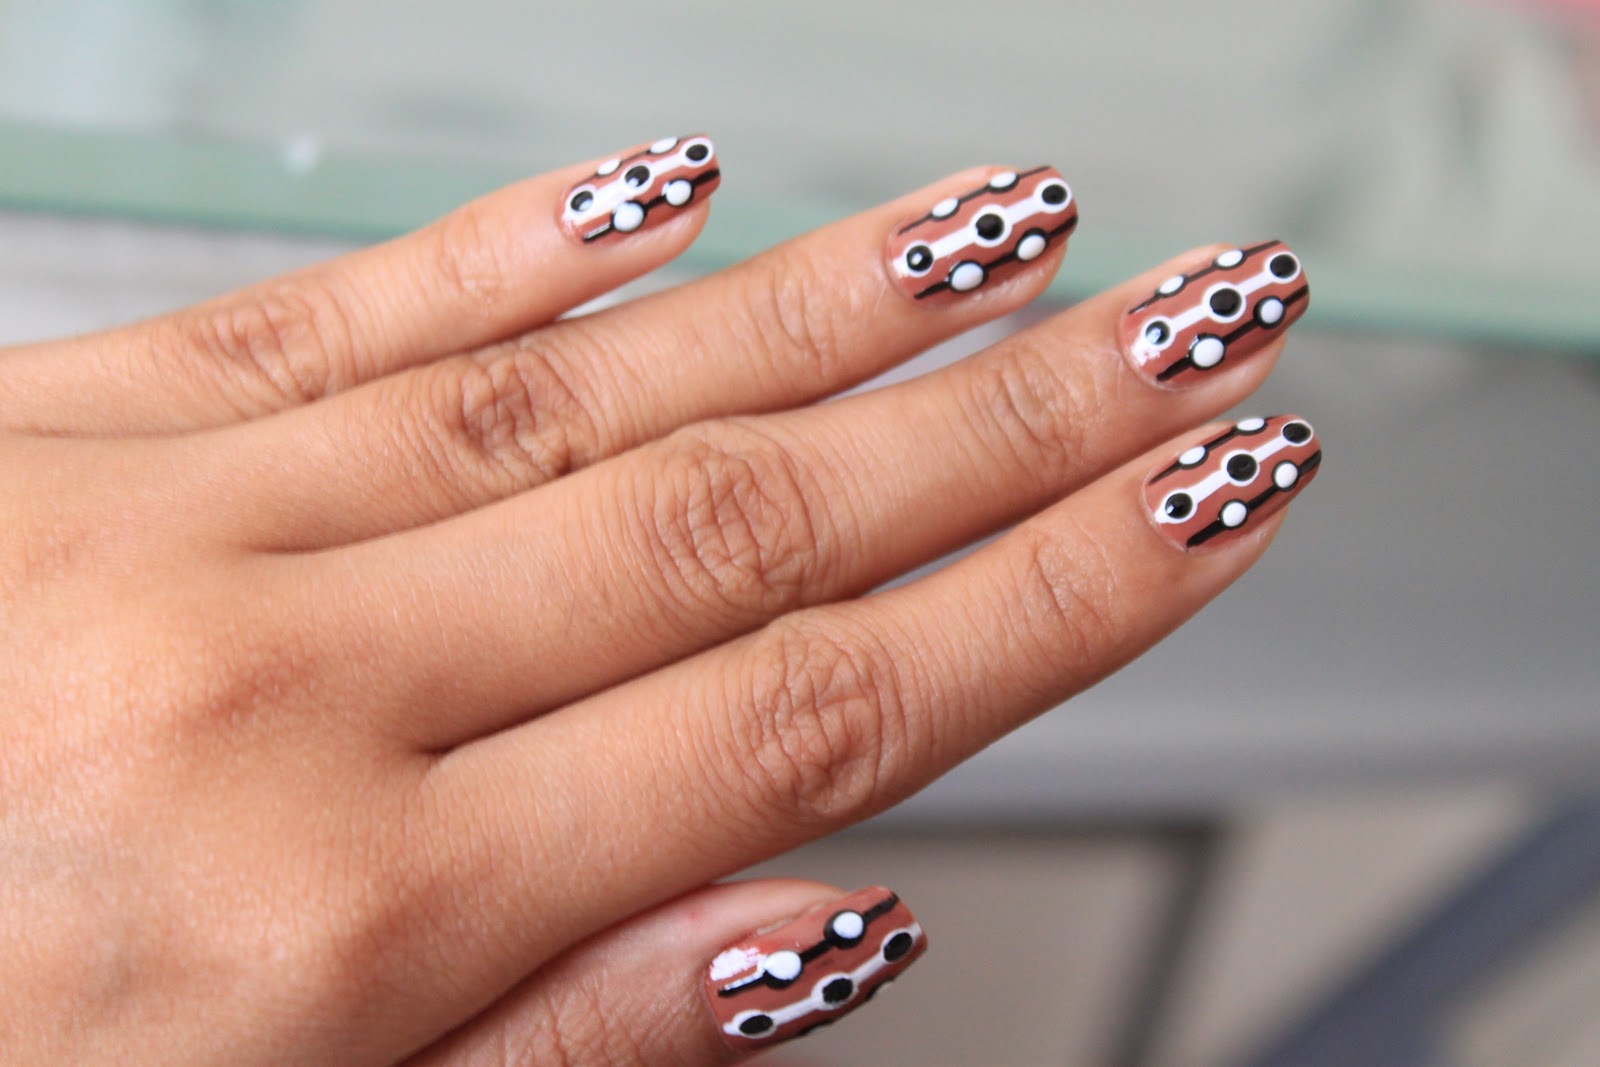 Abstract Nail Art Designs for Beginners - wide 6